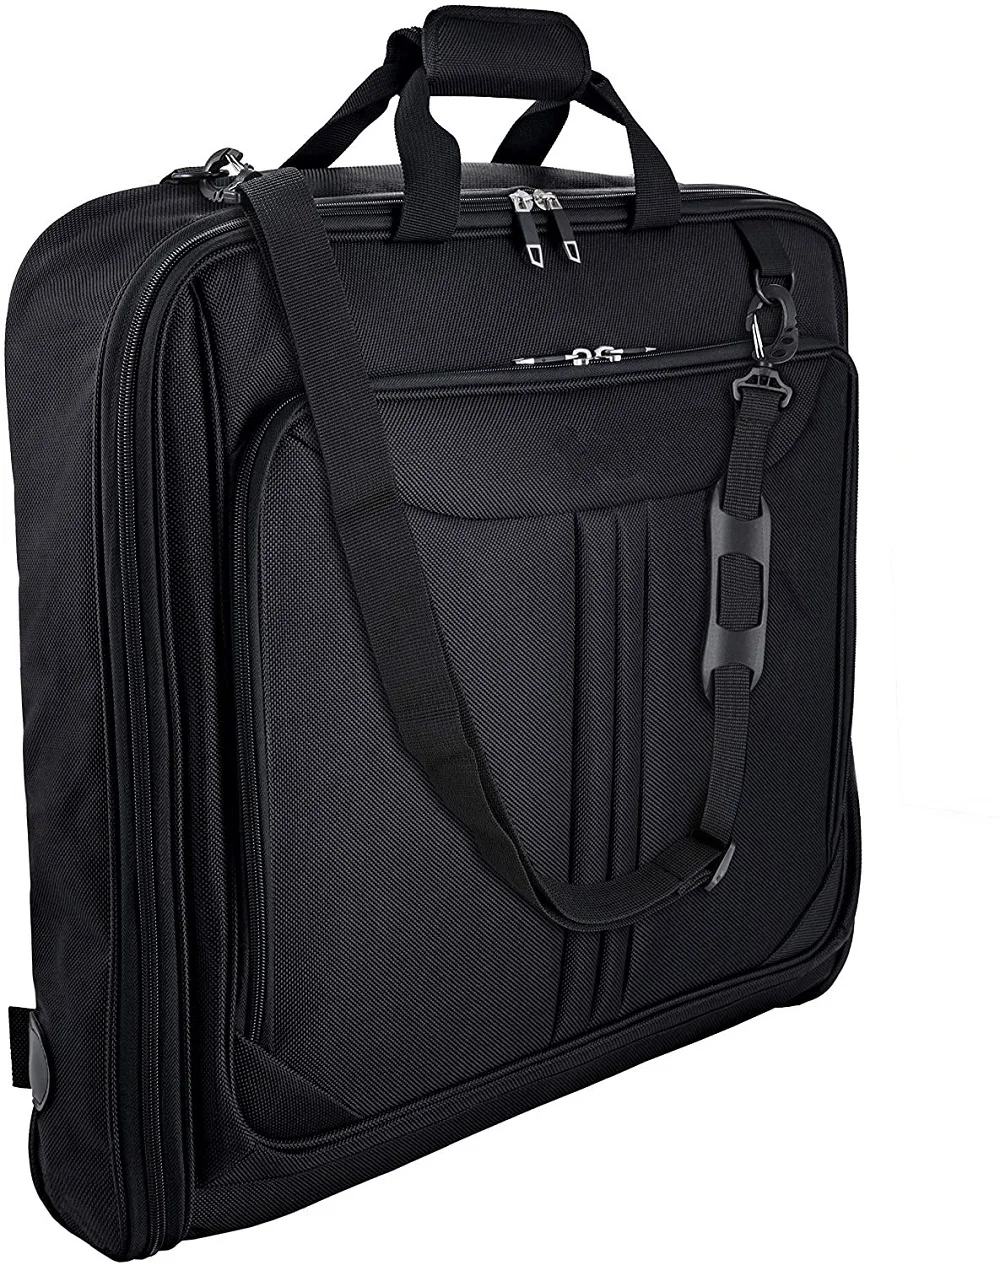 Free Sample Suit Carry On Garment Bag For Travel & Business Trips With ...